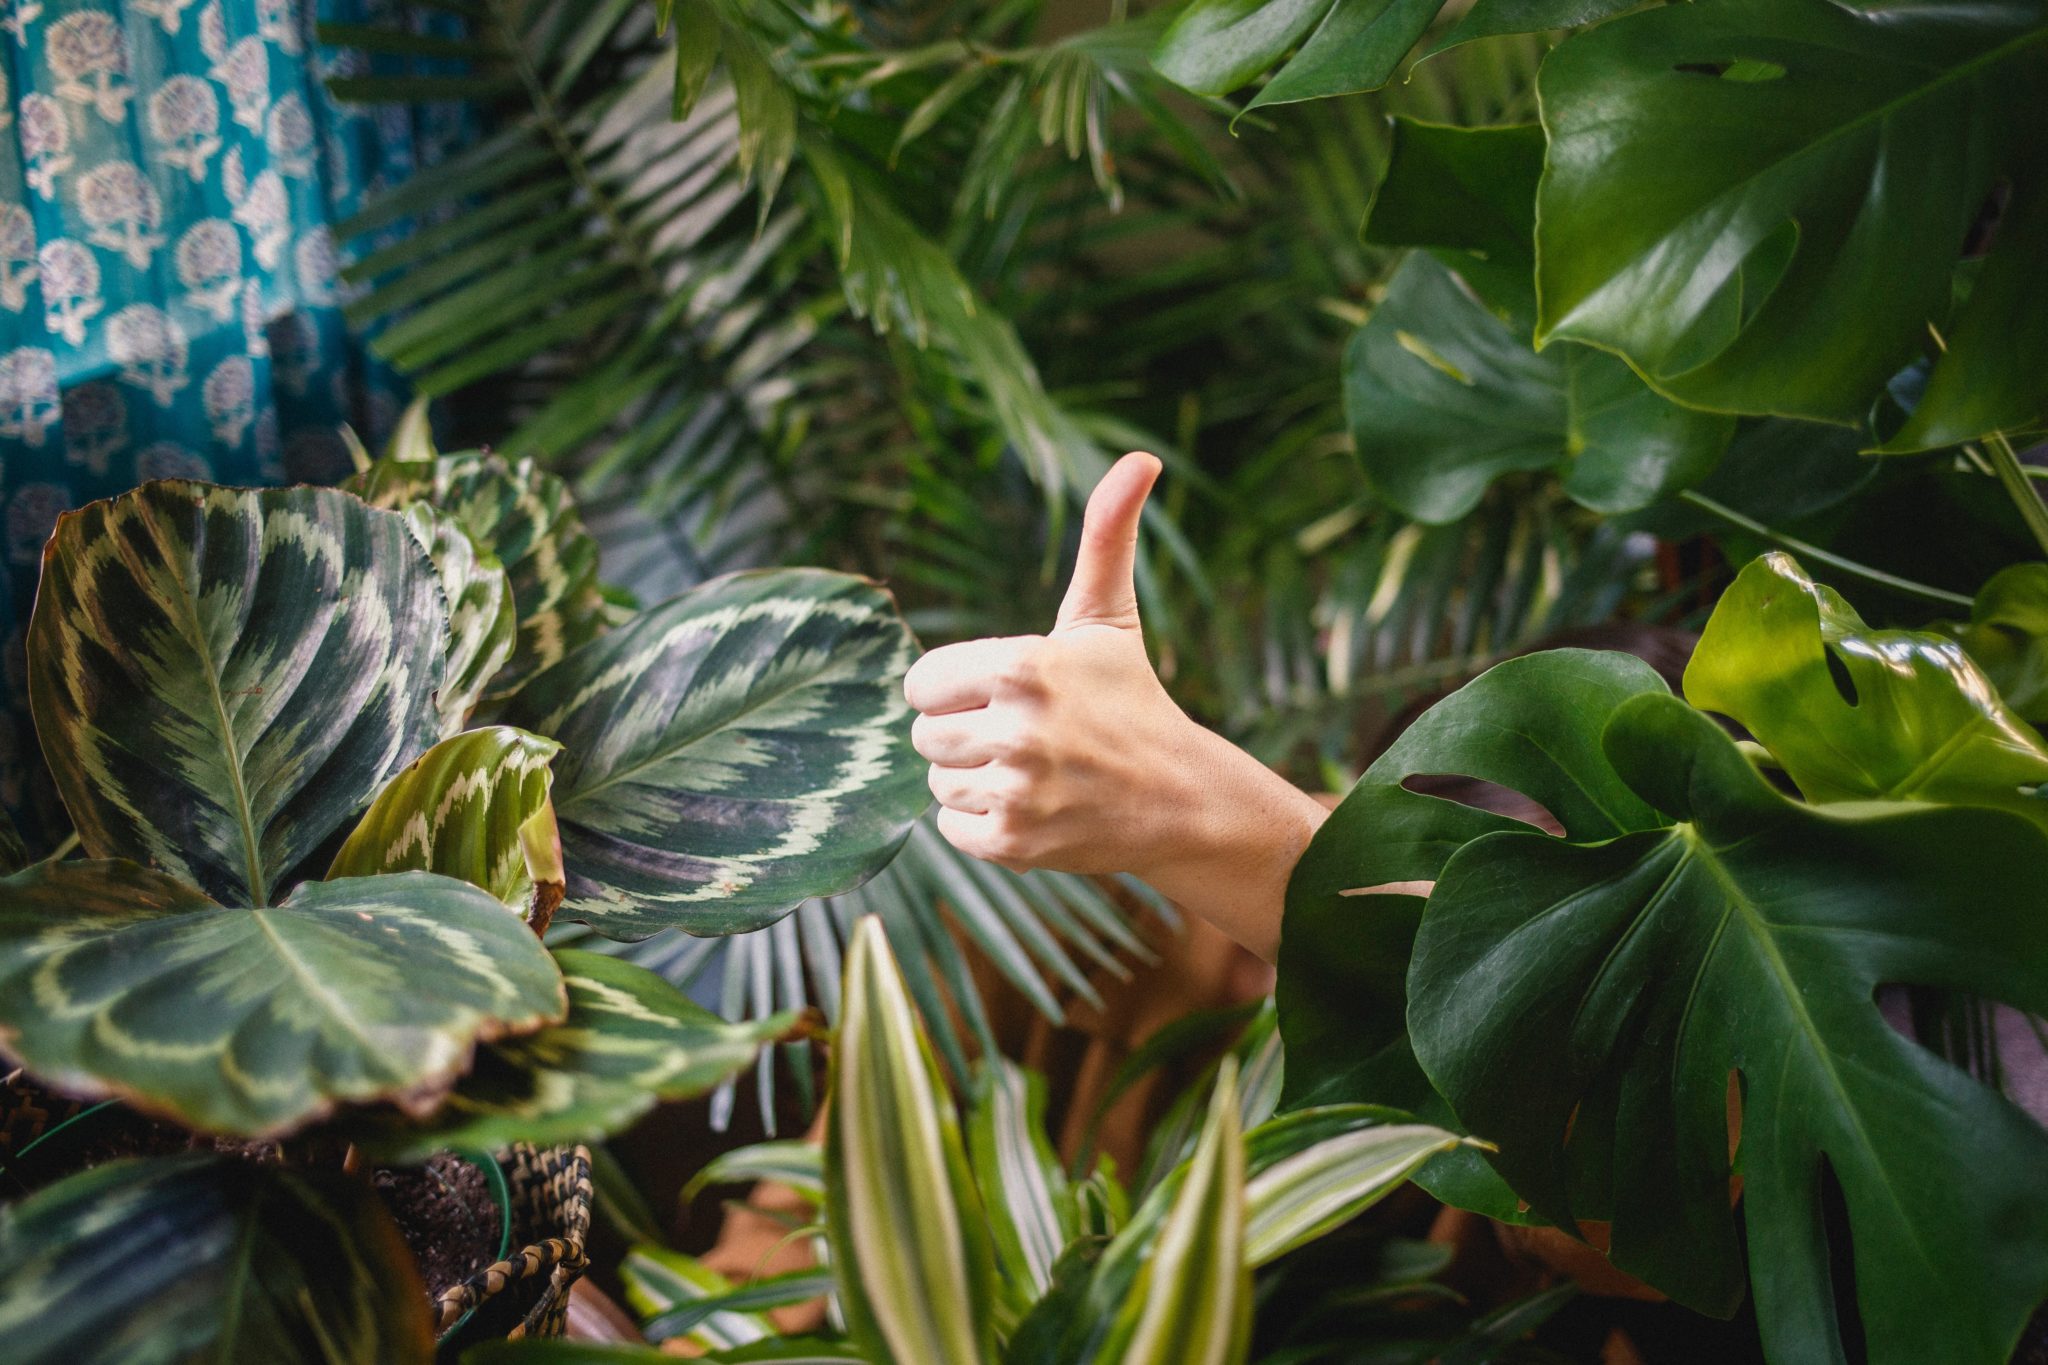 A thumbs up against a background full of green leaves and plants.